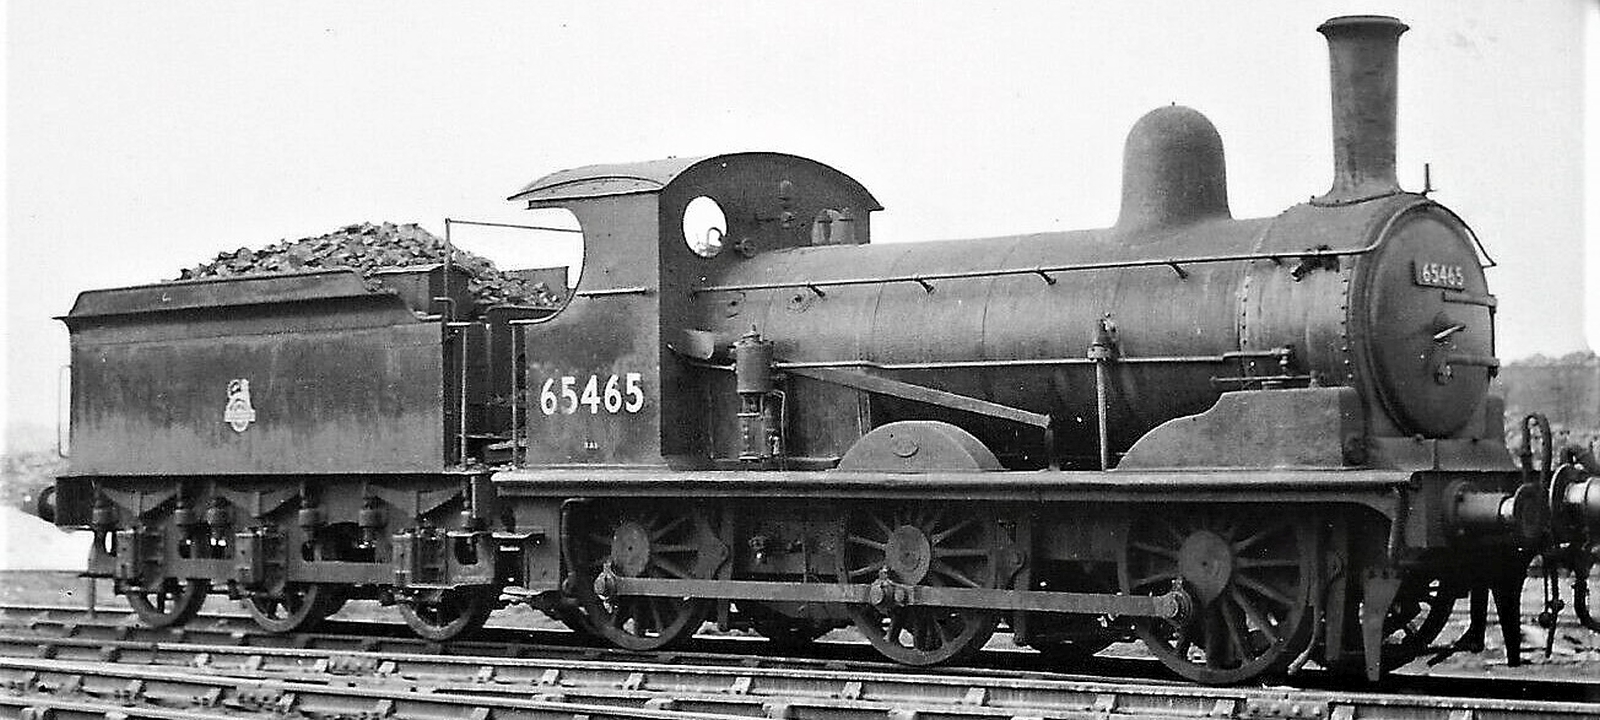 LNER No. 5365 in April 1947 with a freight train at Stratford station